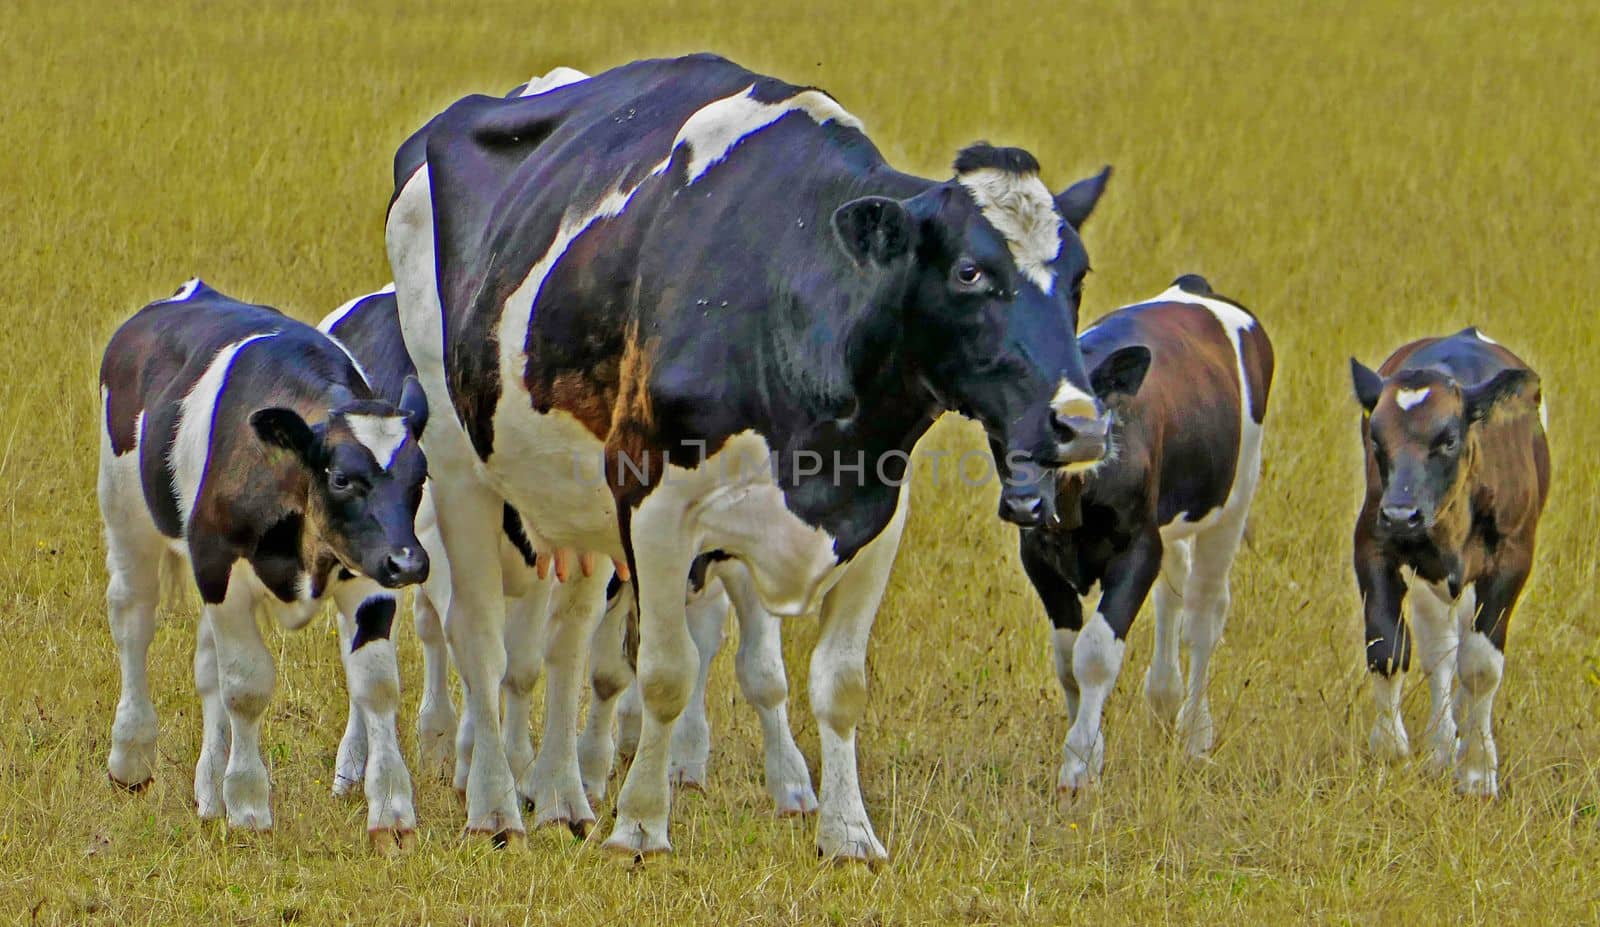 Holstein Friesian mother cow with calves on a meadow in Germany